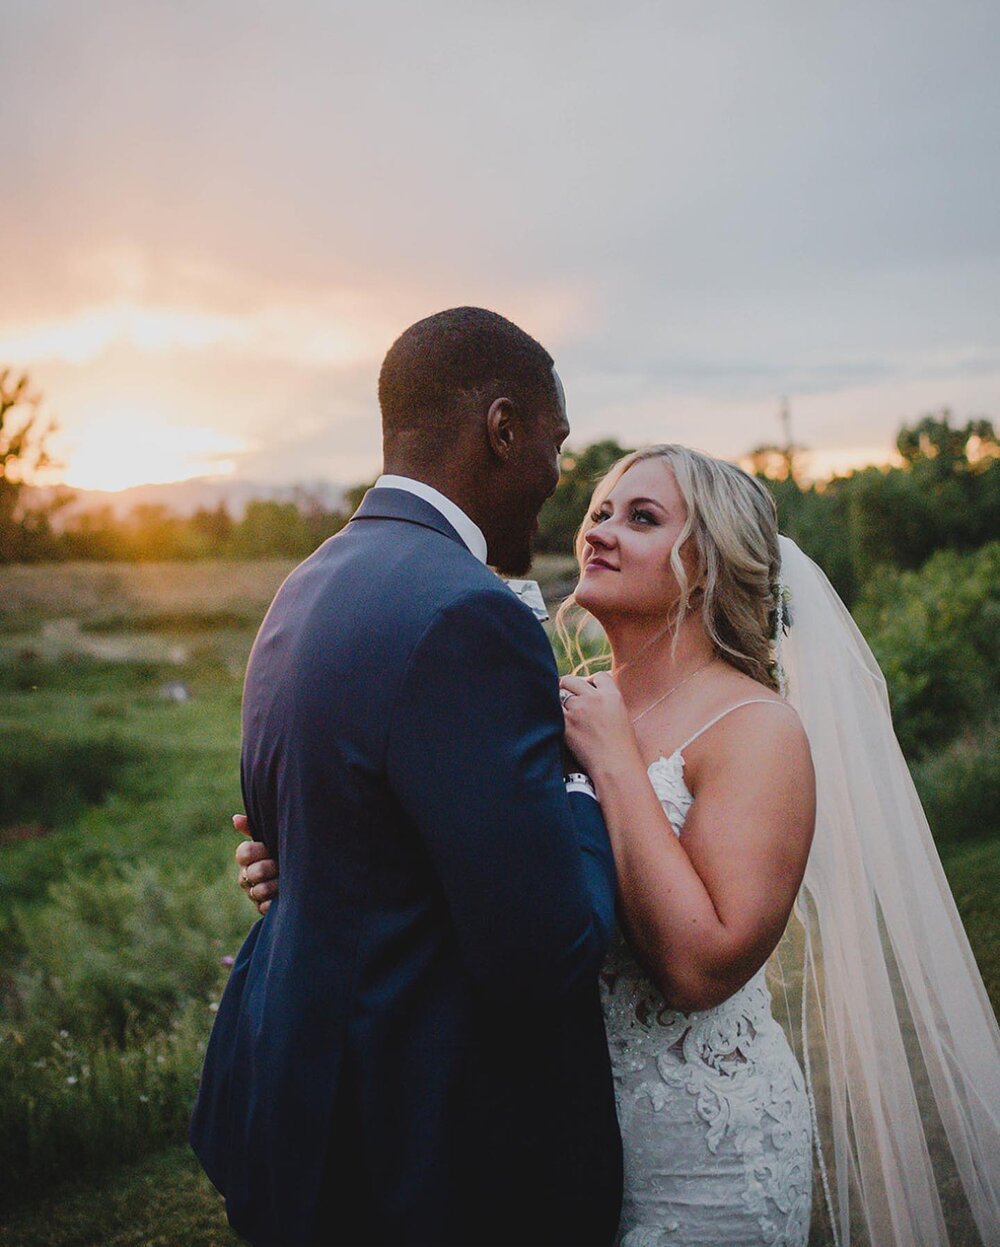 #iandbbride Alexis took her @maggiesotterodesigns gown all the way to Colorado to tie the knot 🌄 and the photography of her &amp; Donovan&rsquo;s wedding and the views are spectacular 🫶🏽
⠀⠀⠀⠀⠀⠀⠀⠀⠀
Vendor Credits: 
gown: @ivoryandbeau
photography: 